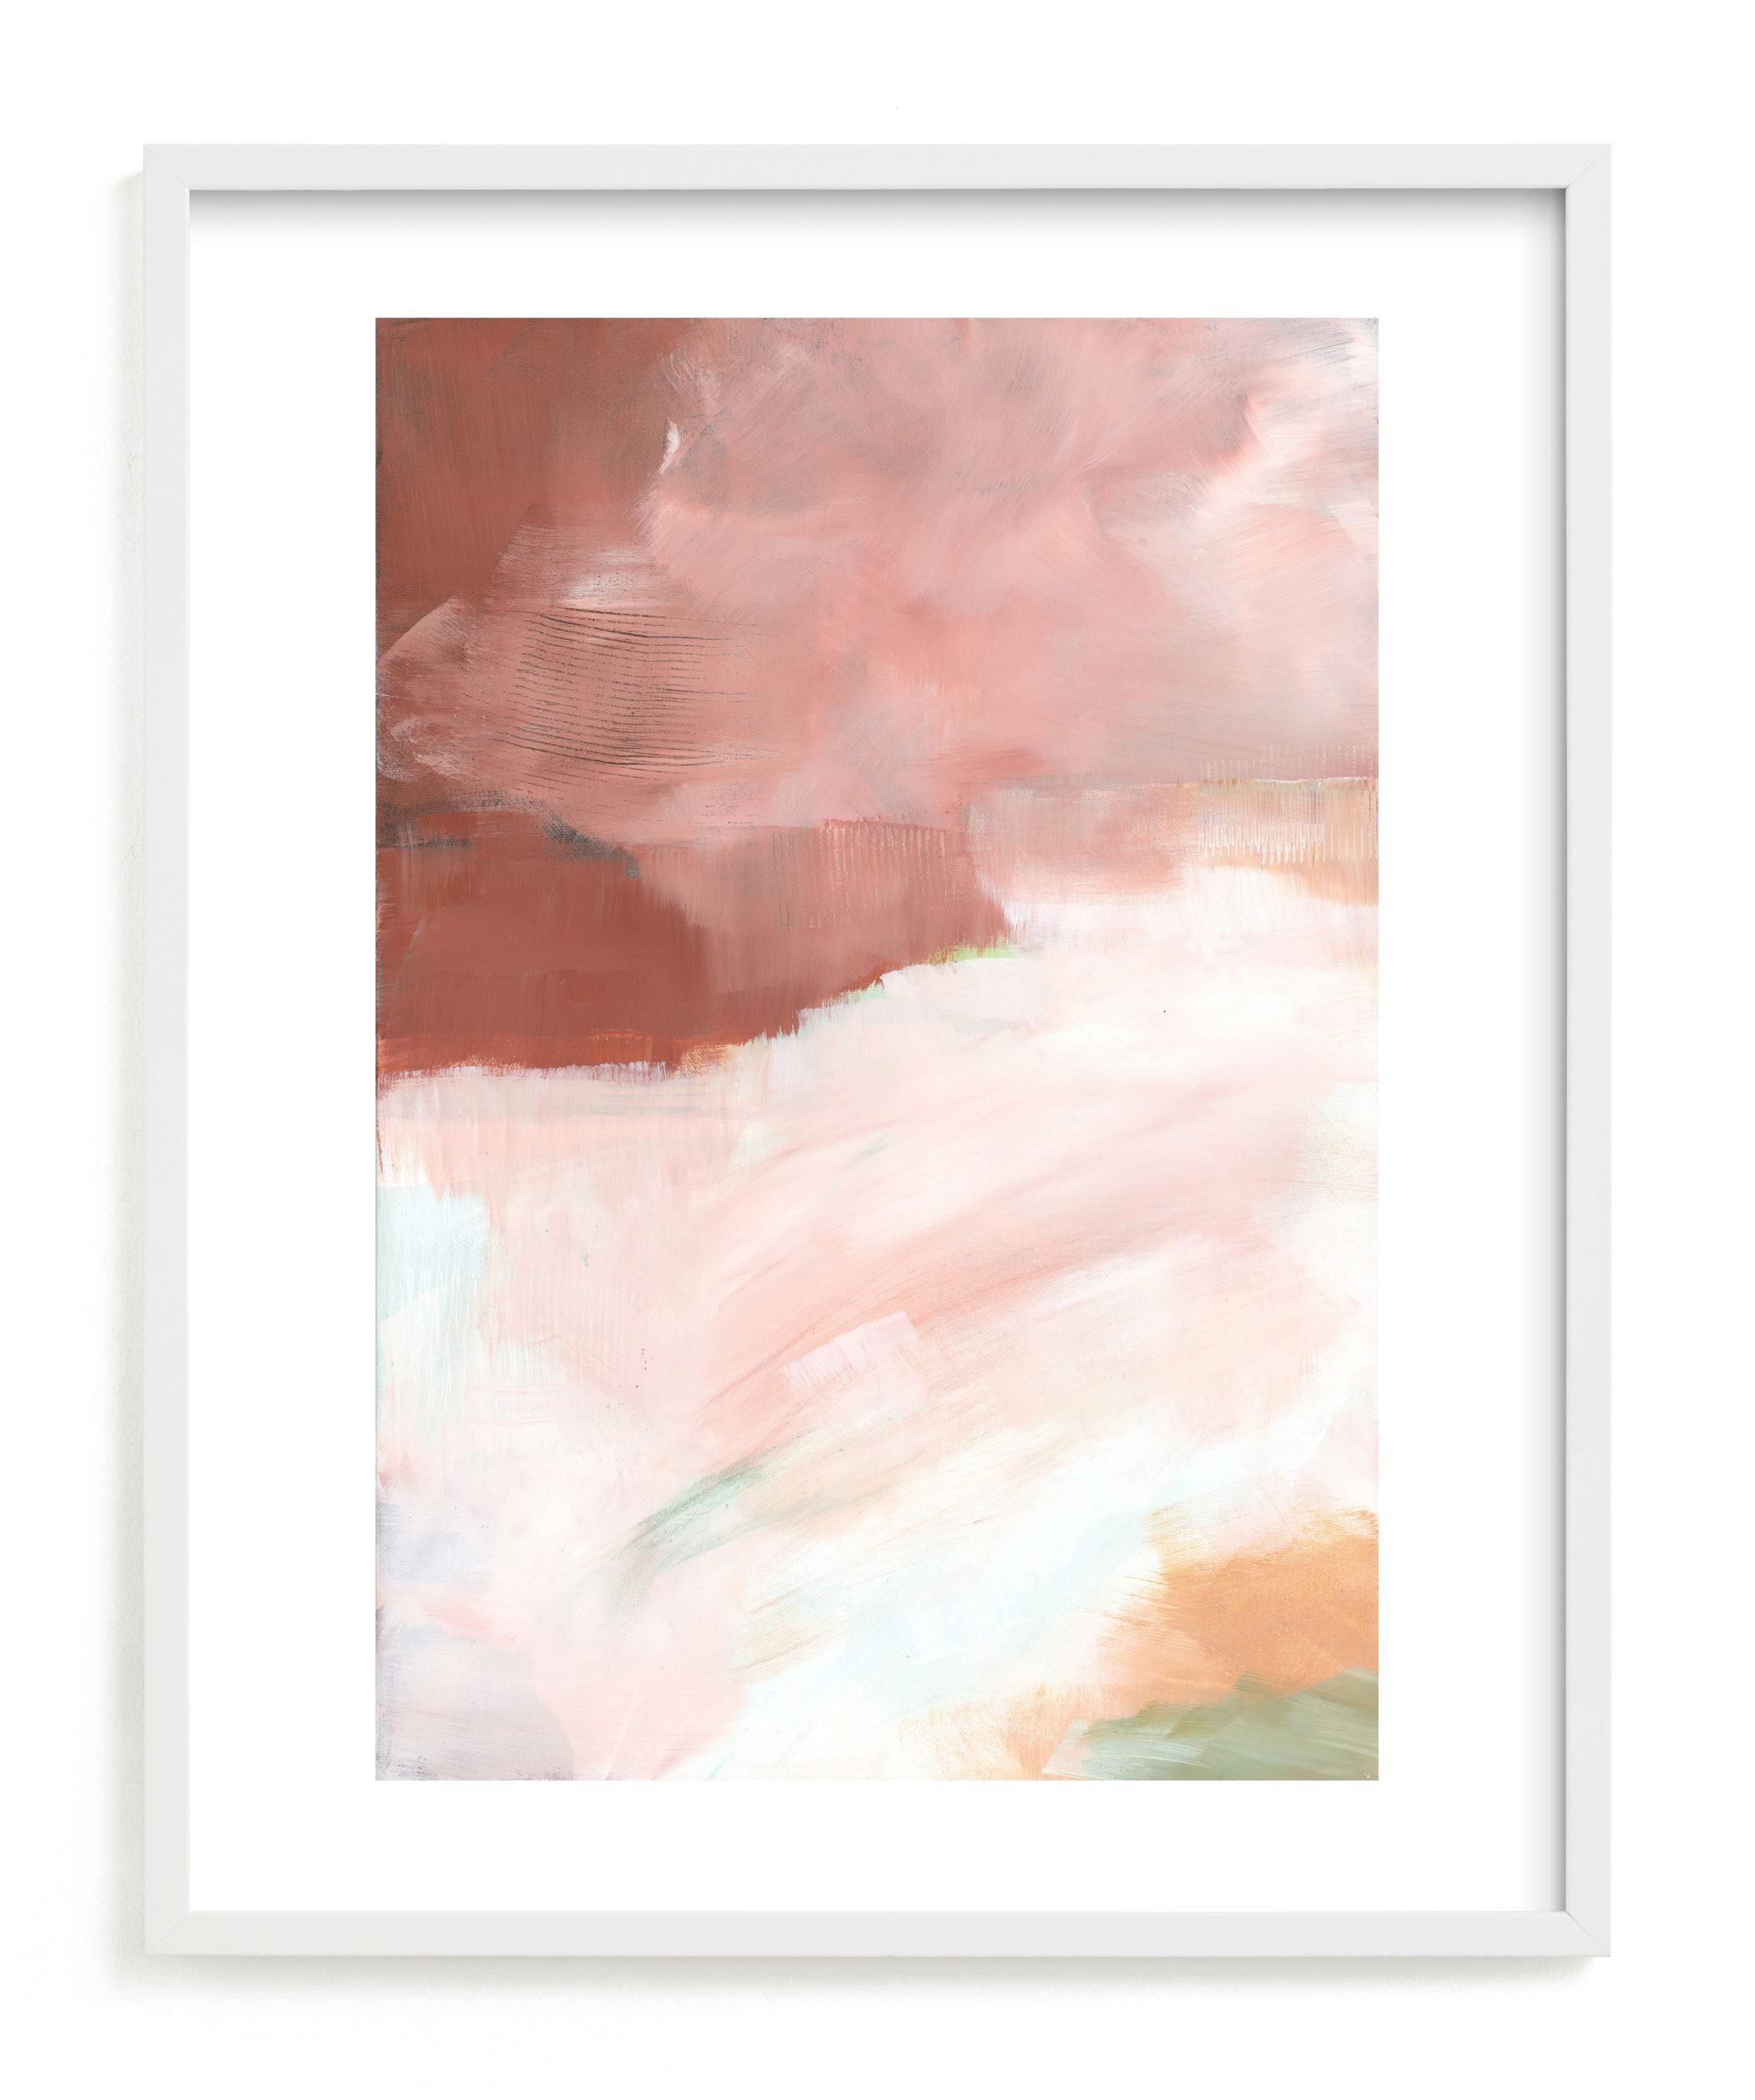 "Sorento l" - Painting Limited Edition Art Print by AlisonJerry. | Minted